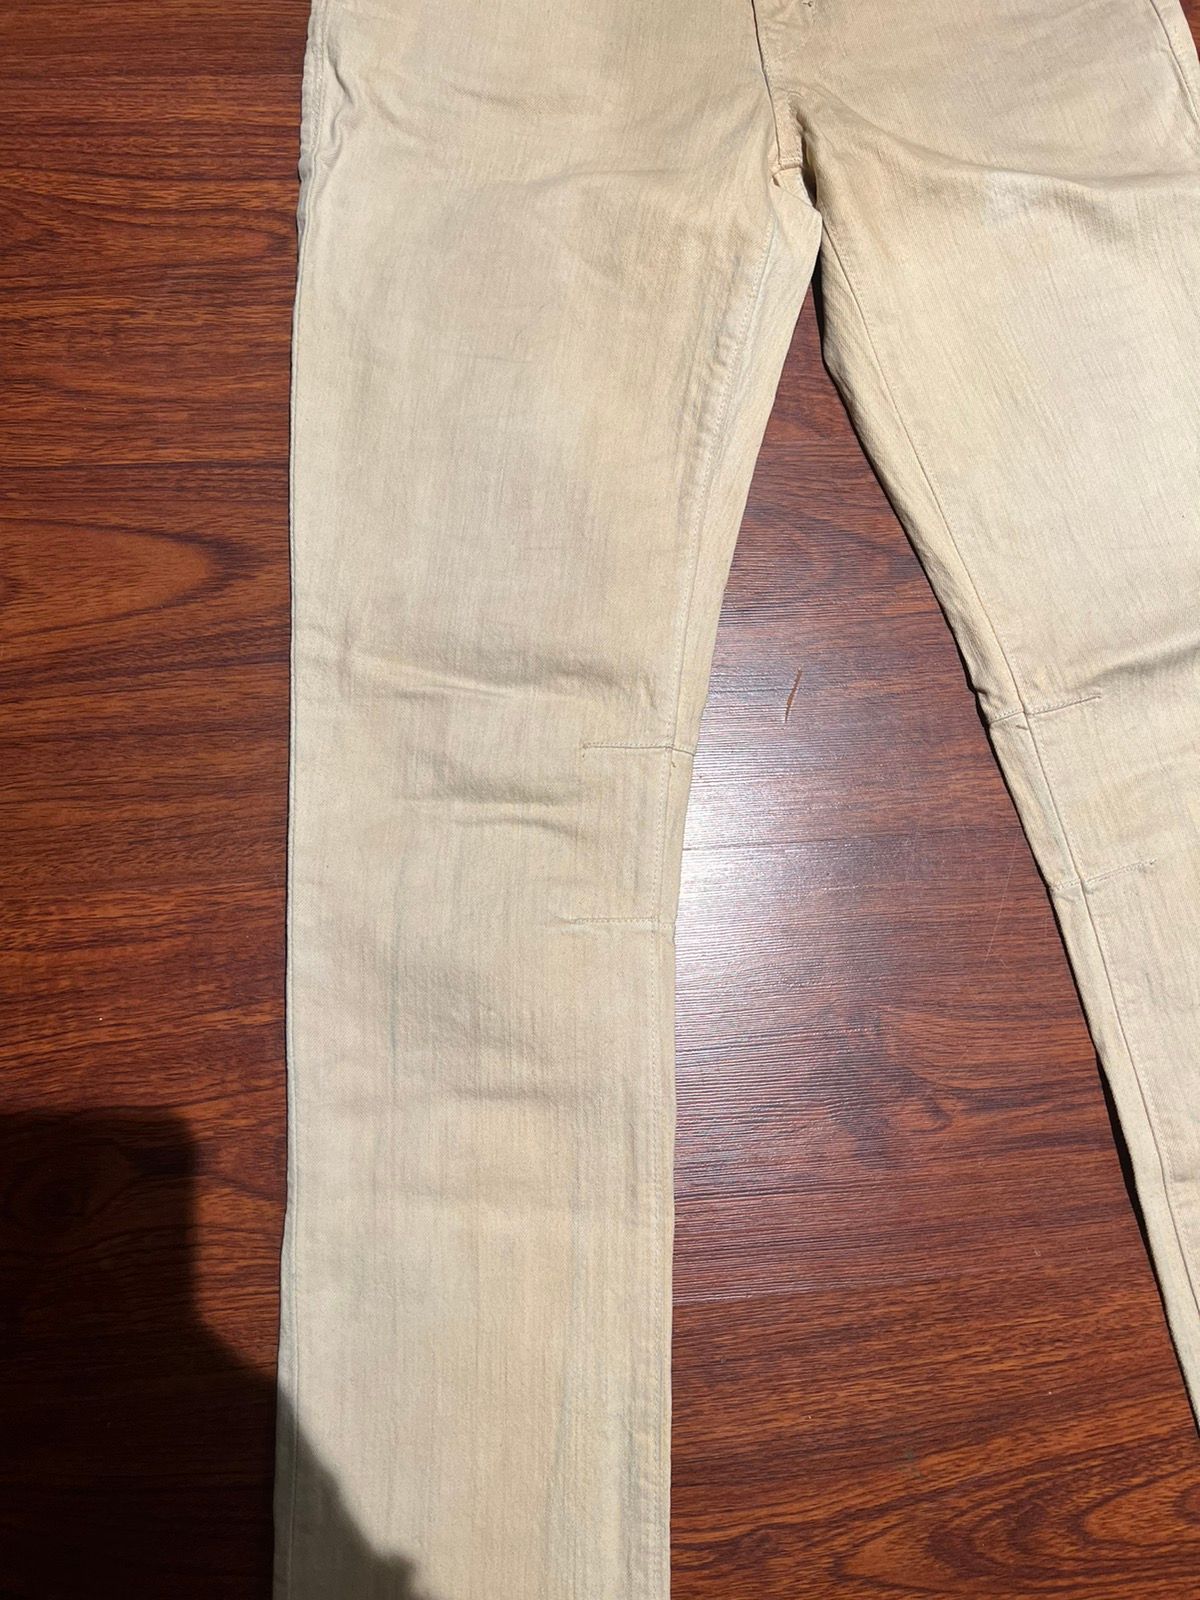 Helmut Lang Off white dyed denim Size US 27 - 2 Preview